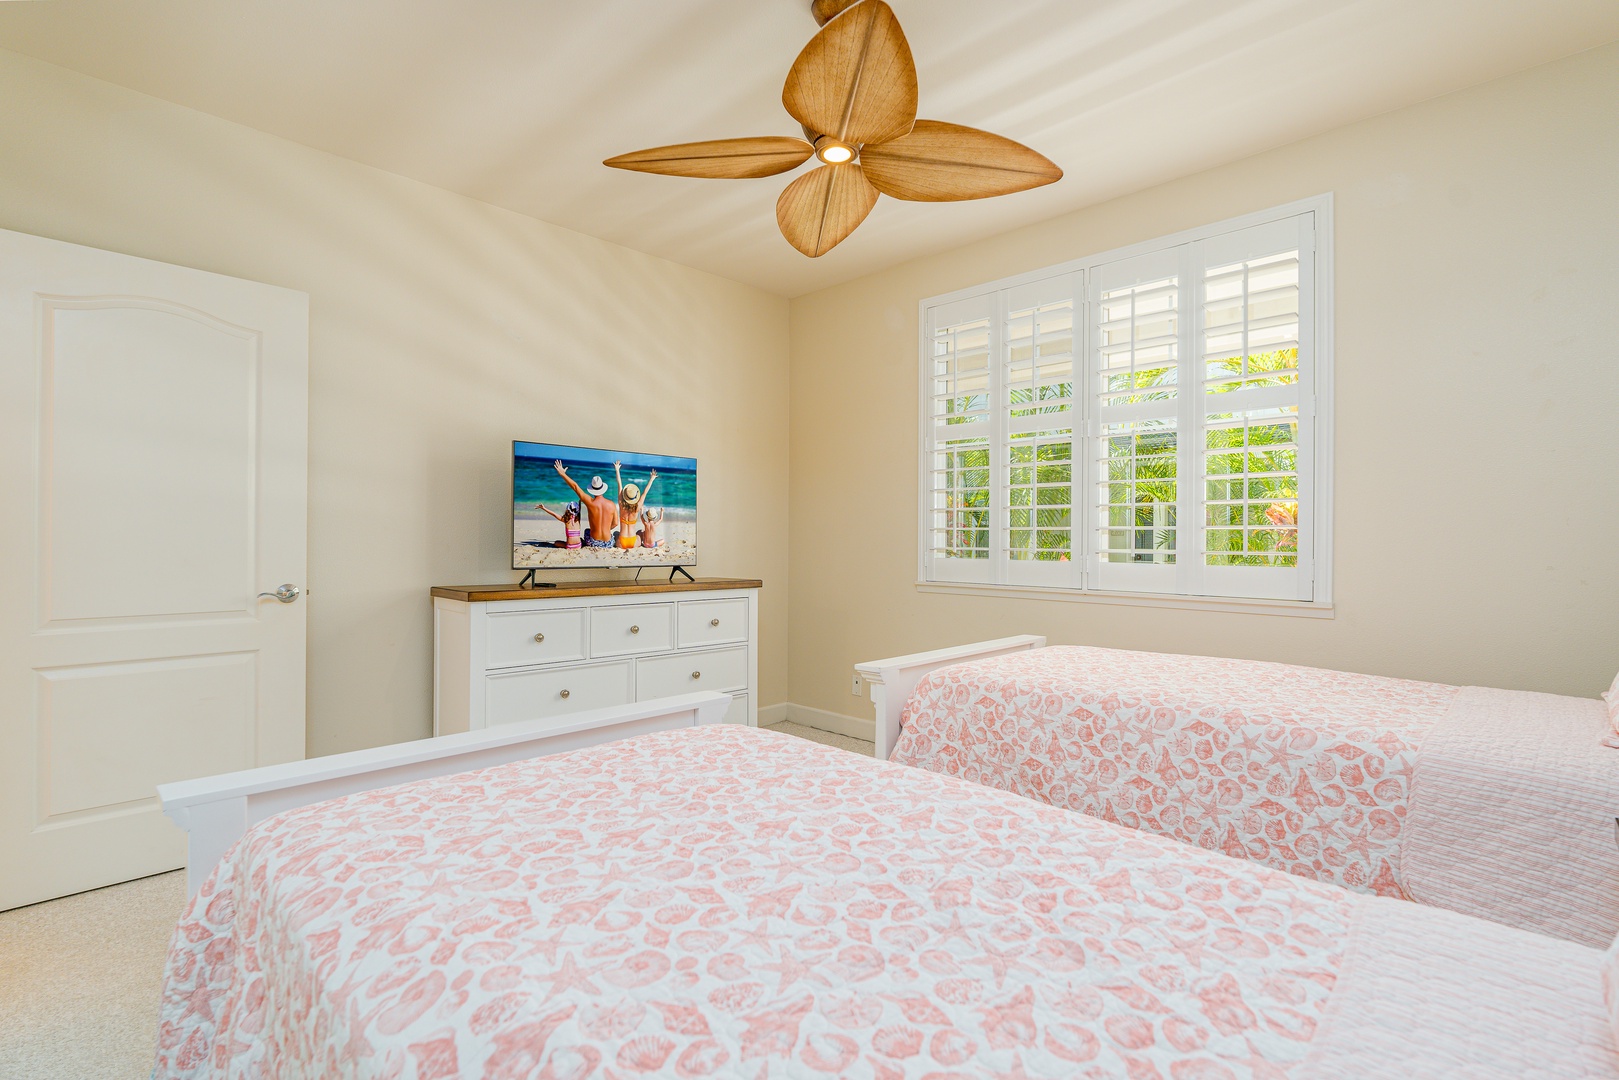 Kapolei Vacation Rentals, Ko Olina Kai 1105F - Comes with a flat screen TV, this is a nice place for the little ones.